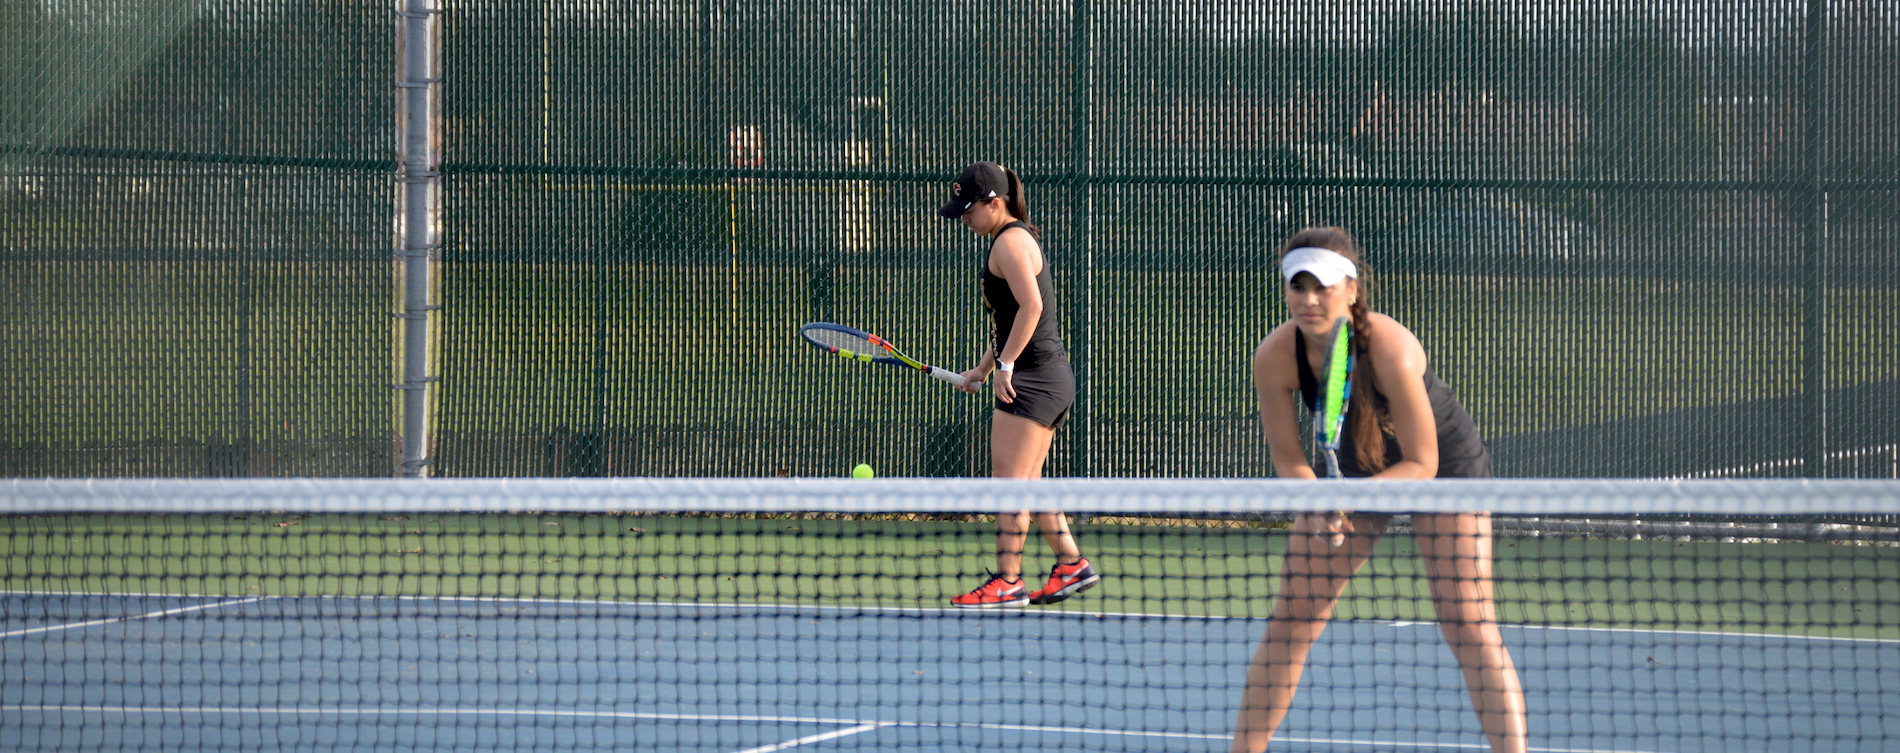 Duong and Carvajalino Named Doubles Team of the Week